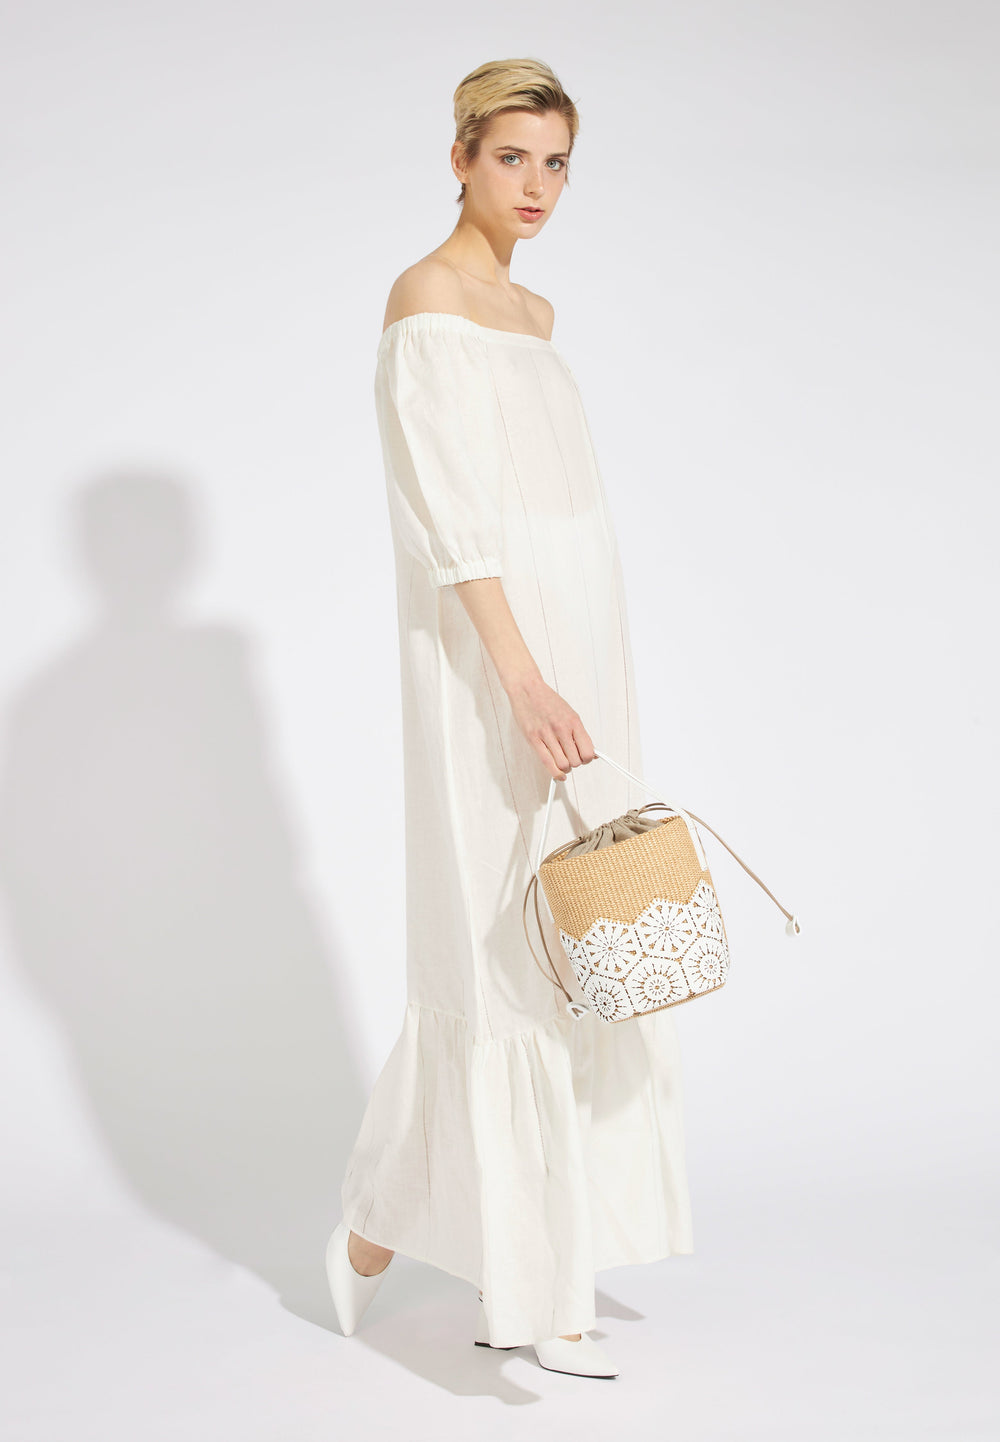 Woman wearing an off-the-shoulder white dress with a wicker handbag and white heels against a white background